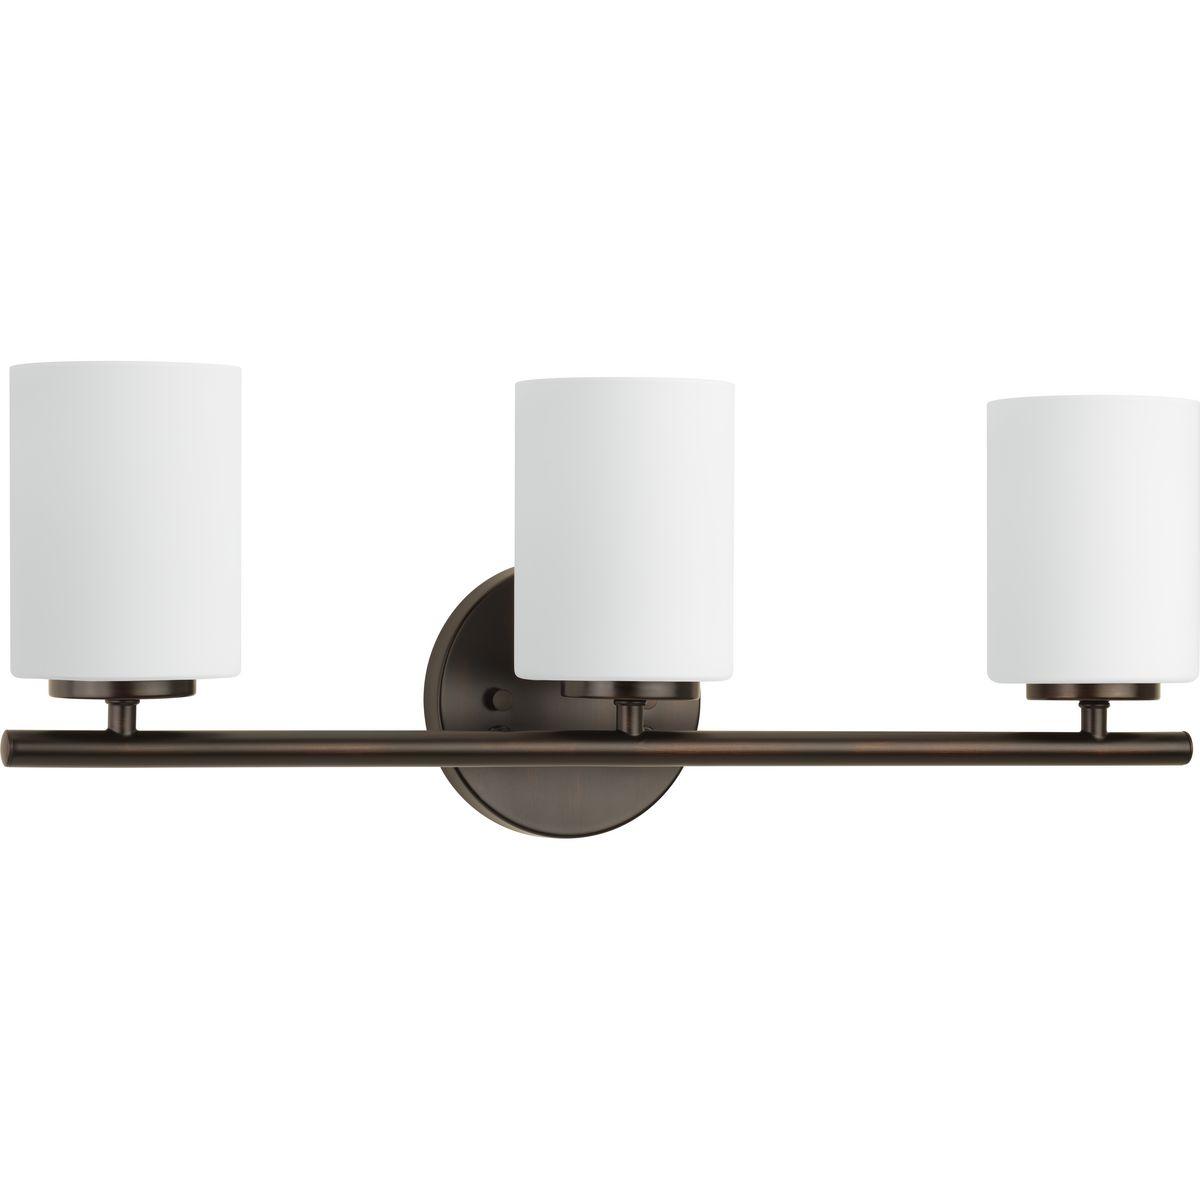 Hubbell P2159-20 Three-light bath & vanity from the Replay Collection, smooth forms, linear details and a pleasingly elegant frame enhance a simplified modern look. Fixture can be mounted up or down. Antique Bronze finish.  ; Ideal for a bathroom ; Perfect for modern and 